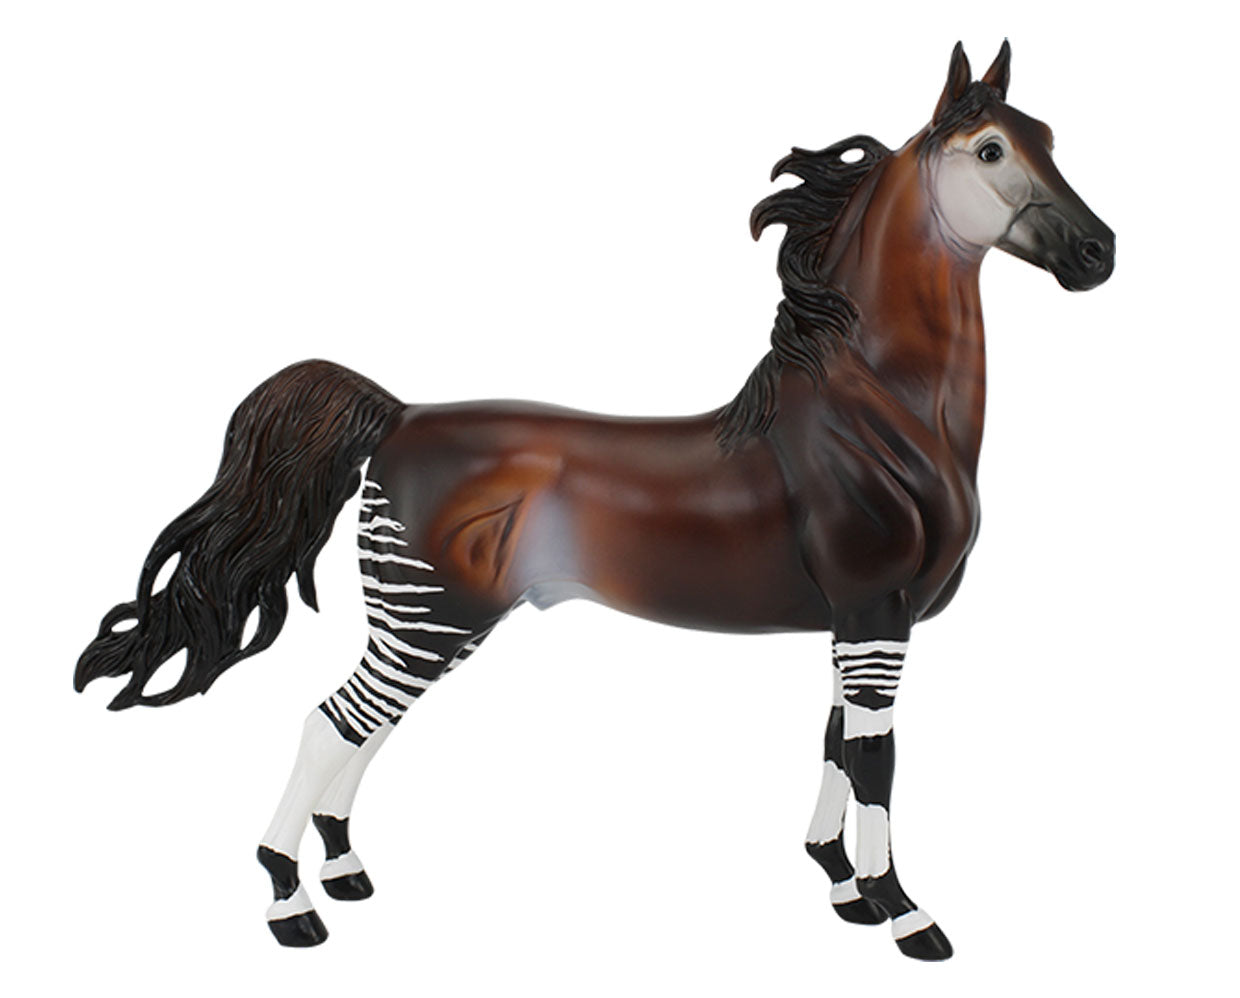 Introducing the First Edition in the Breyer Wild Animal Series â€“ Kehinde!